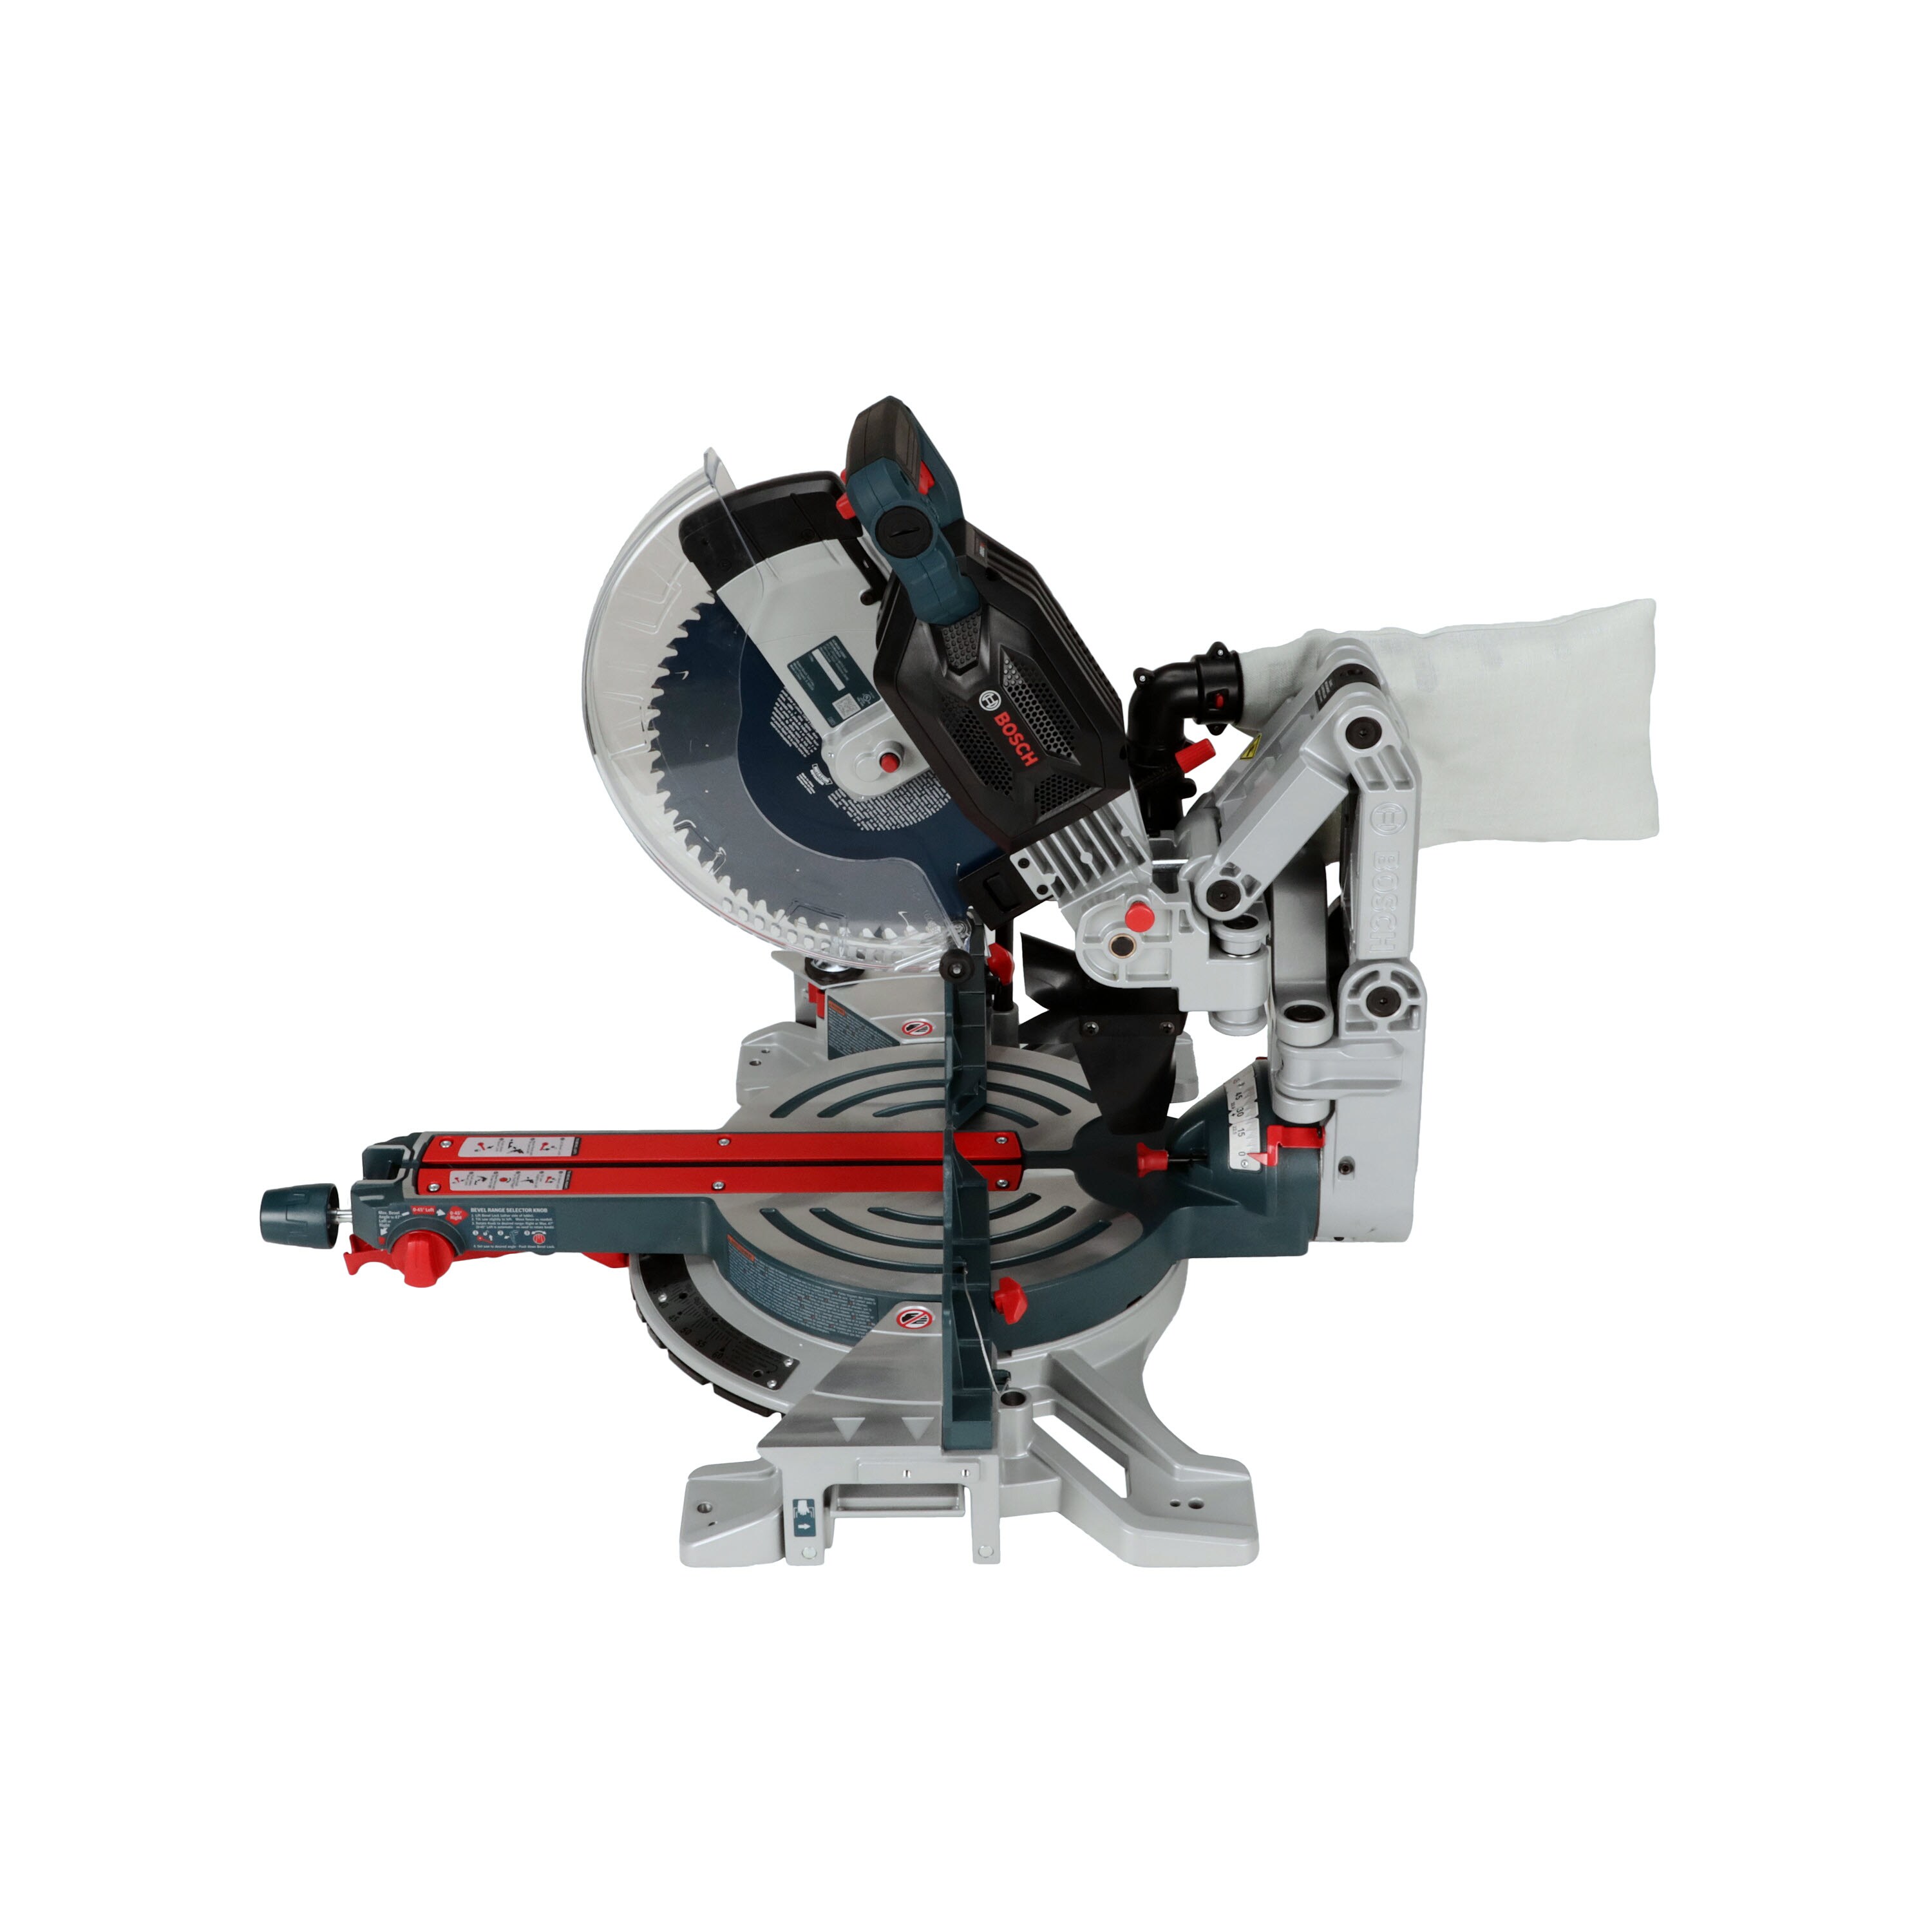 Be surprised Baffle priest Bosch 18-volt Miter Saws at Lowes.com